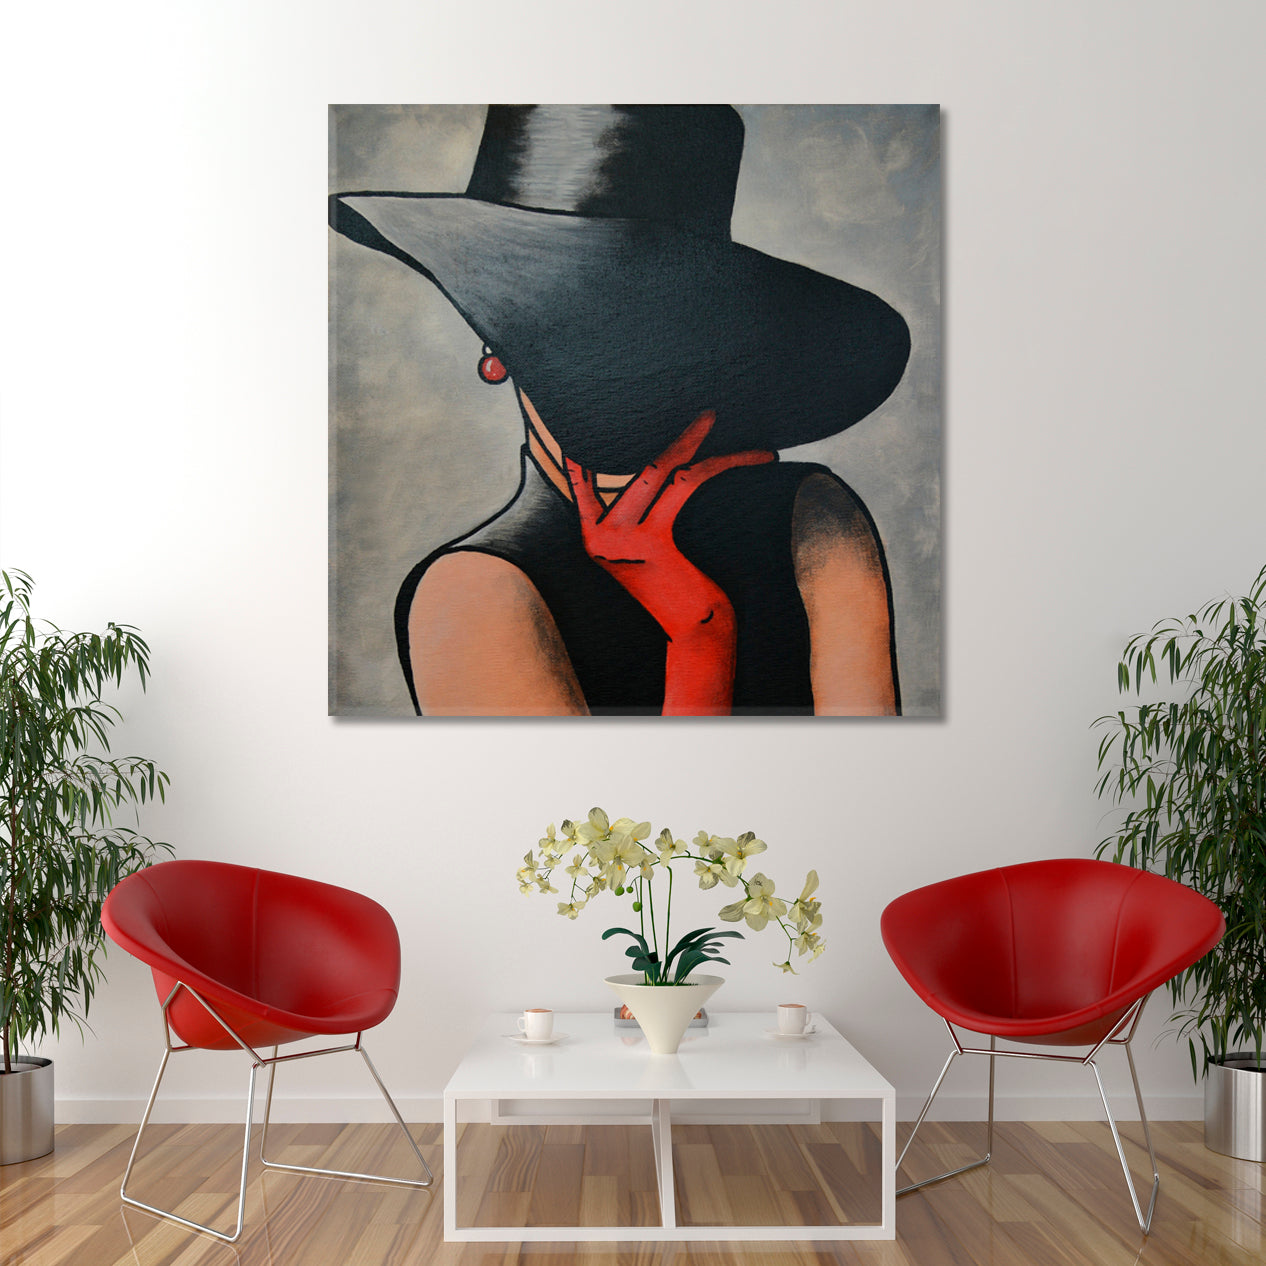 LADY Red Gloves Abstract Art Woman Portrait Fashion Canvas Print Artesty 1 Panel 12"x12" 